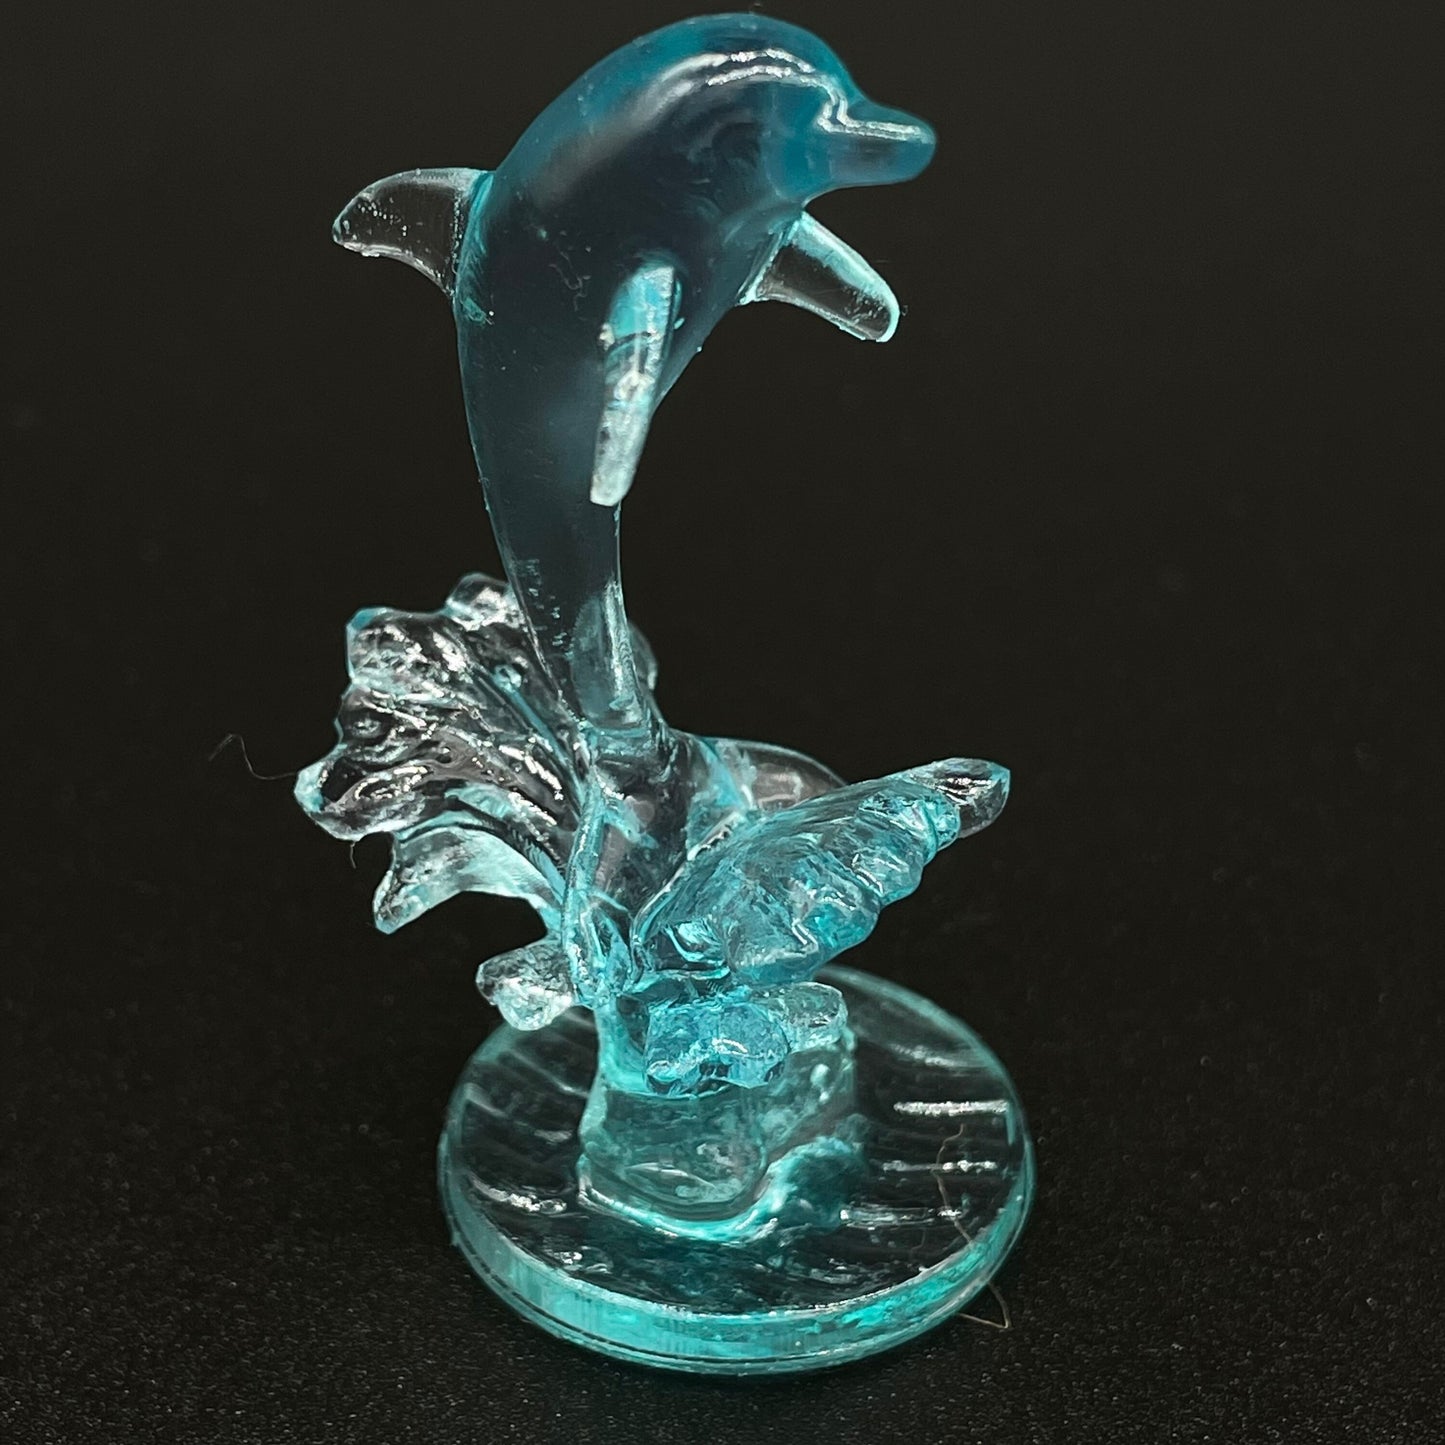 3d Print, Dolphin, Resin, Bottle Nosed Dolphin, 3d Dolphin, blue dolphin, Icy Dolphin, figurine, stocking stuffer, gift, dolphin lovers